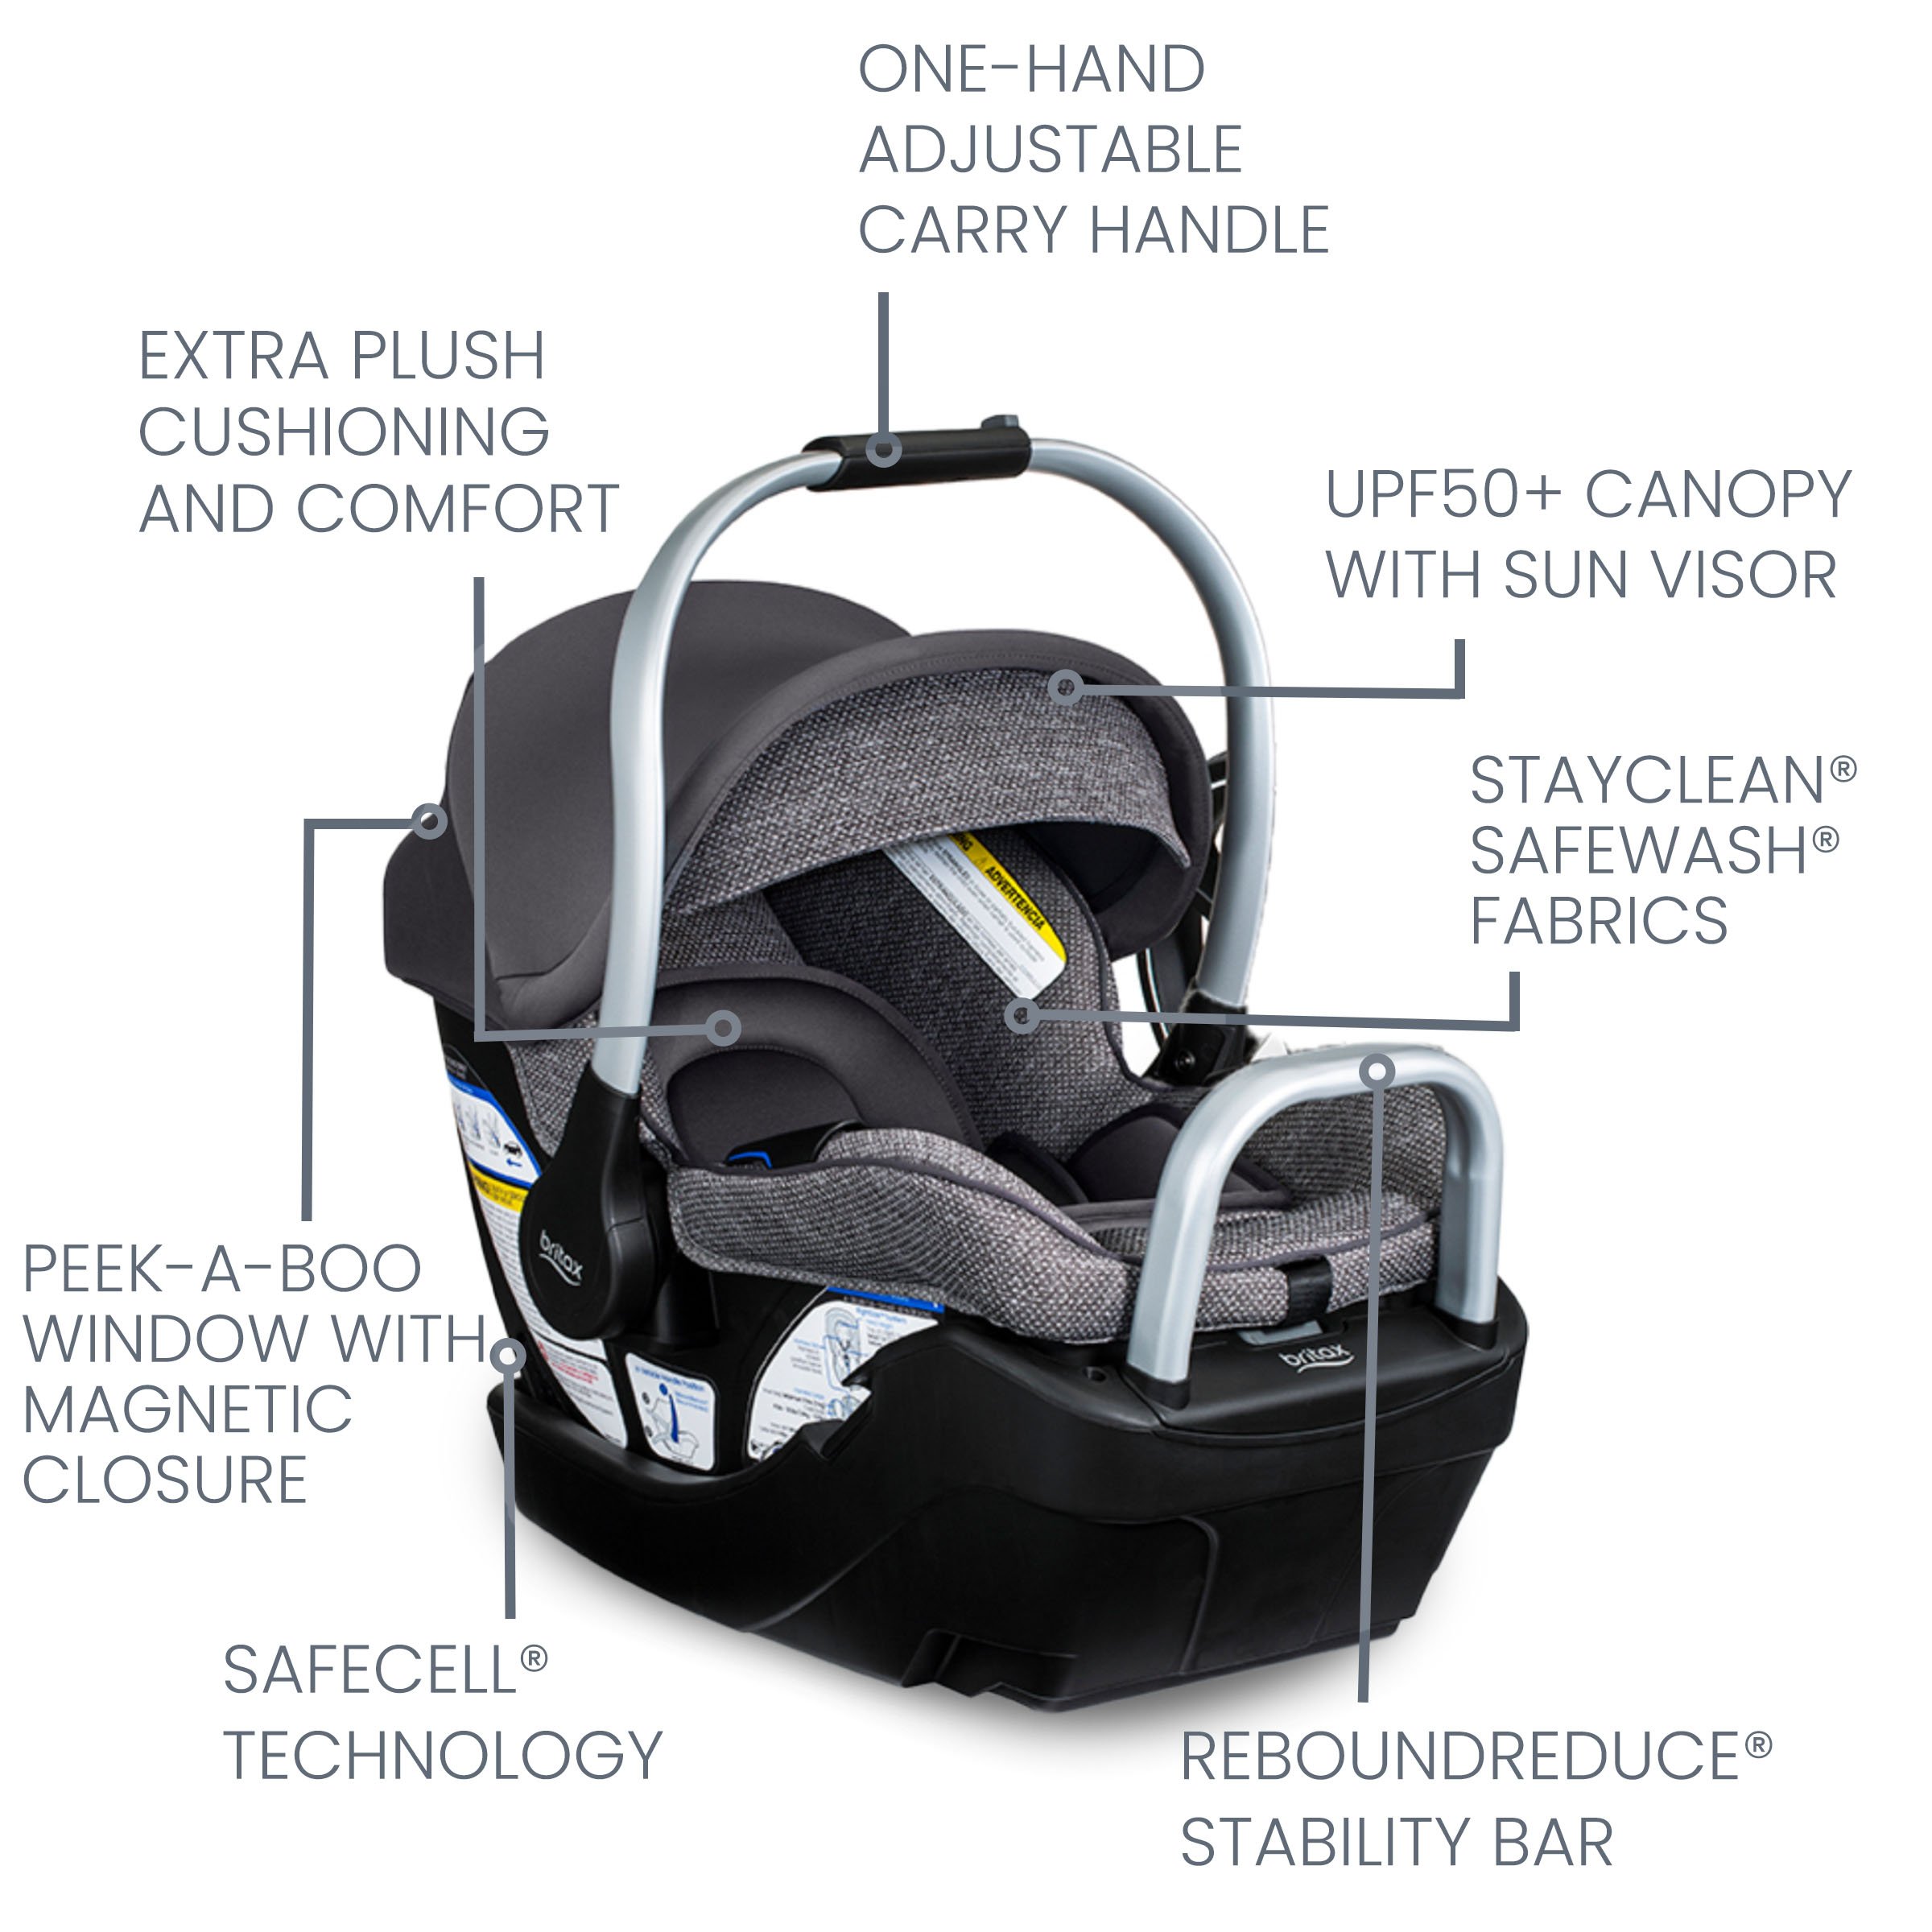 Infant Car Seat Features Labeled on Pindot Stone Fashion